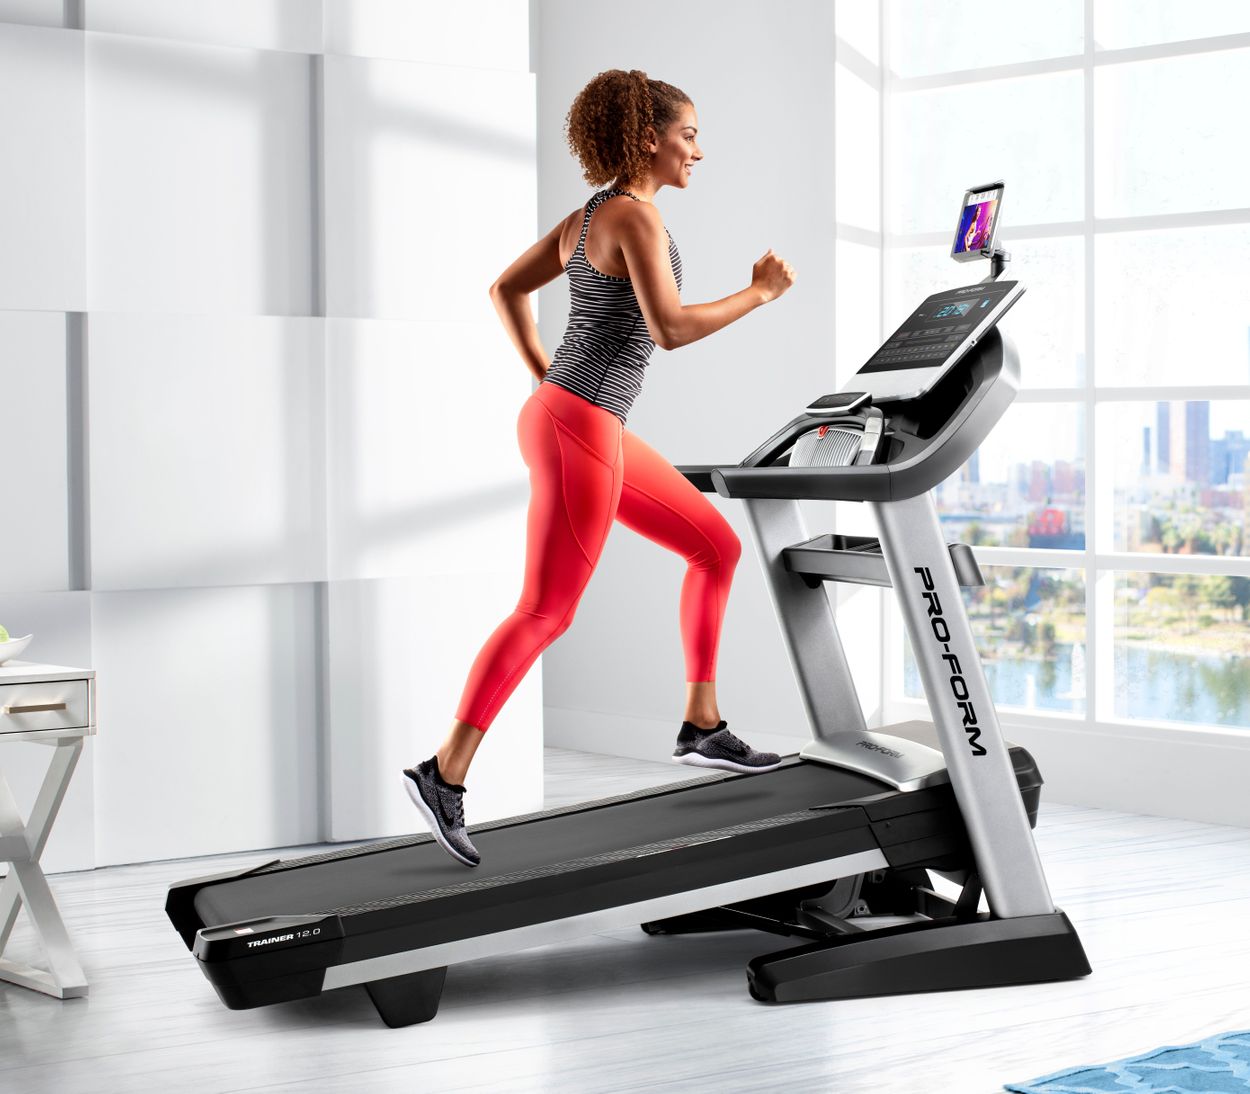 Proform Trainer 12 0 Treadmill With 1 Year Ifit Coach Included